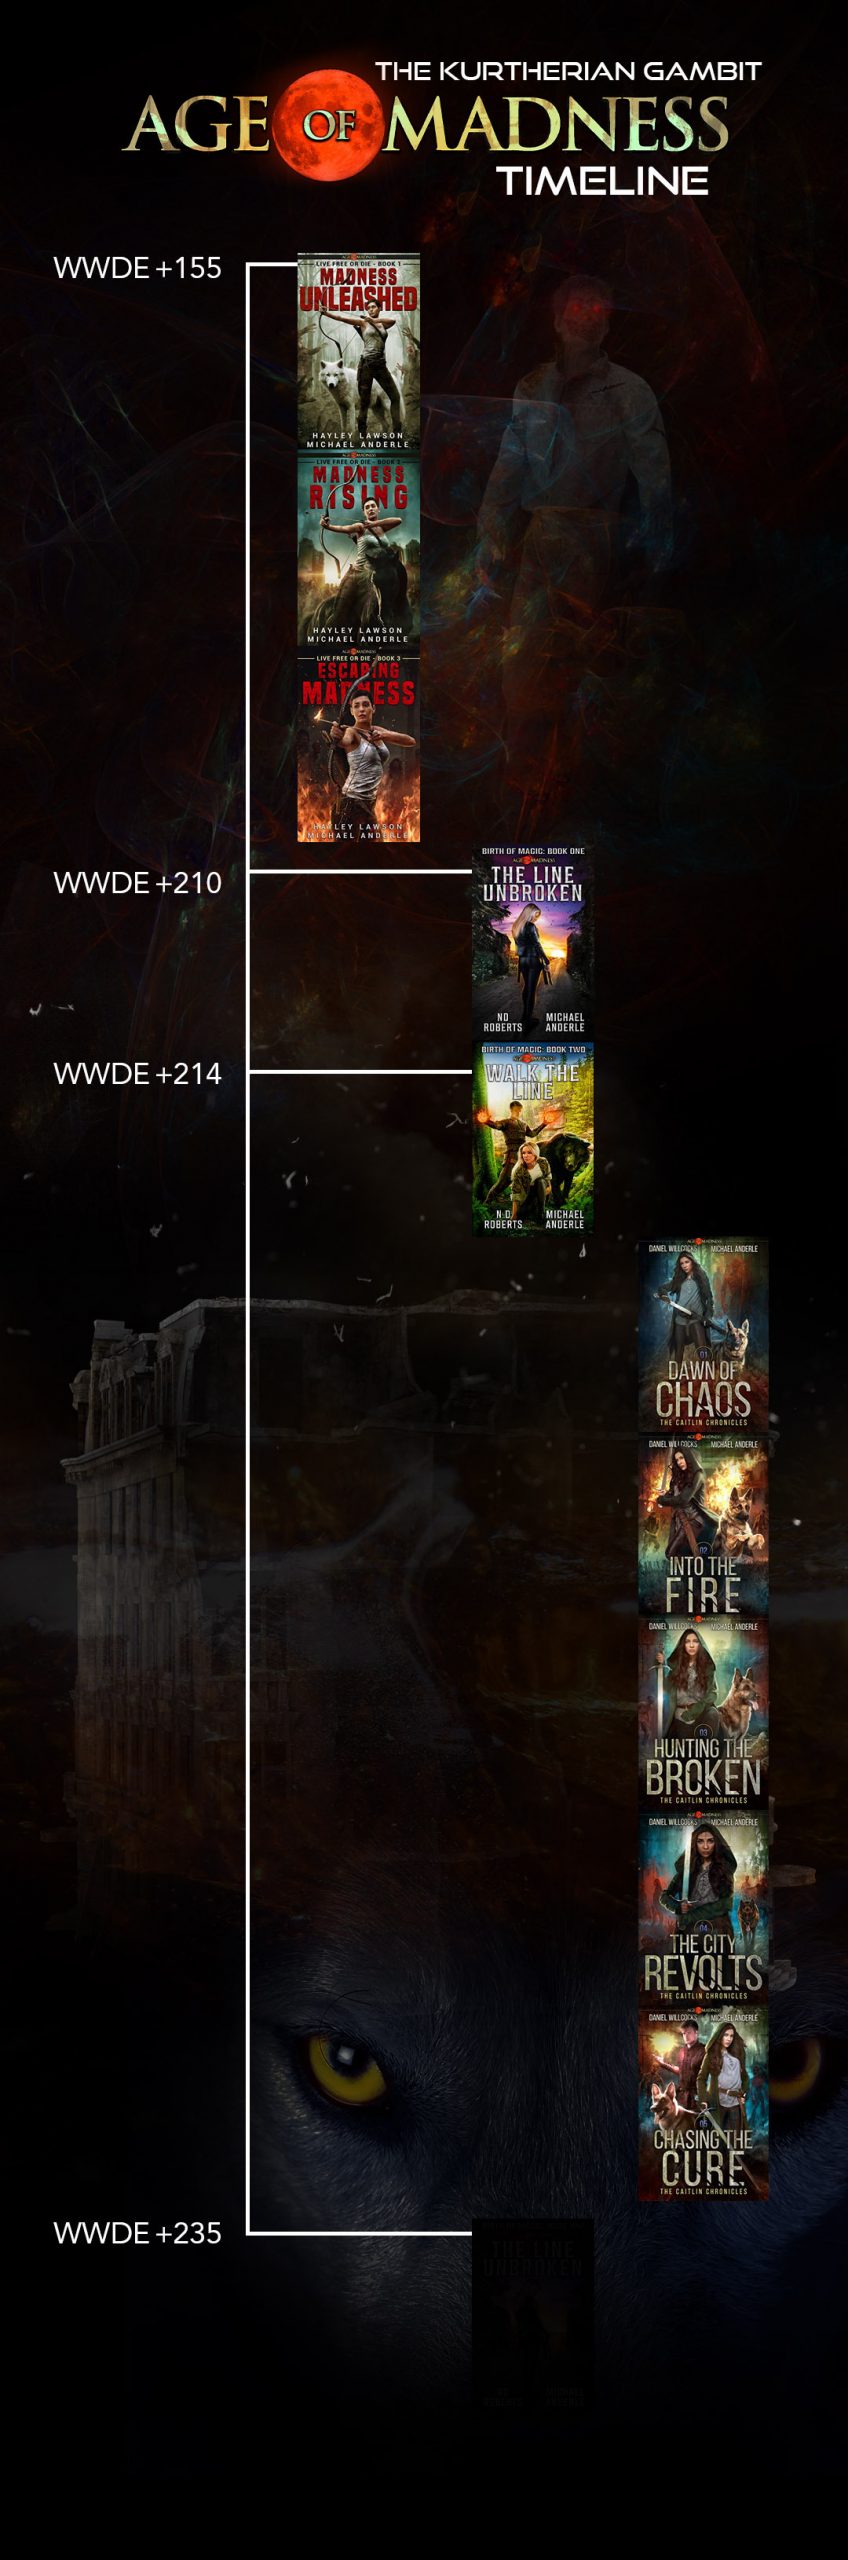 Age of Madness Timeline